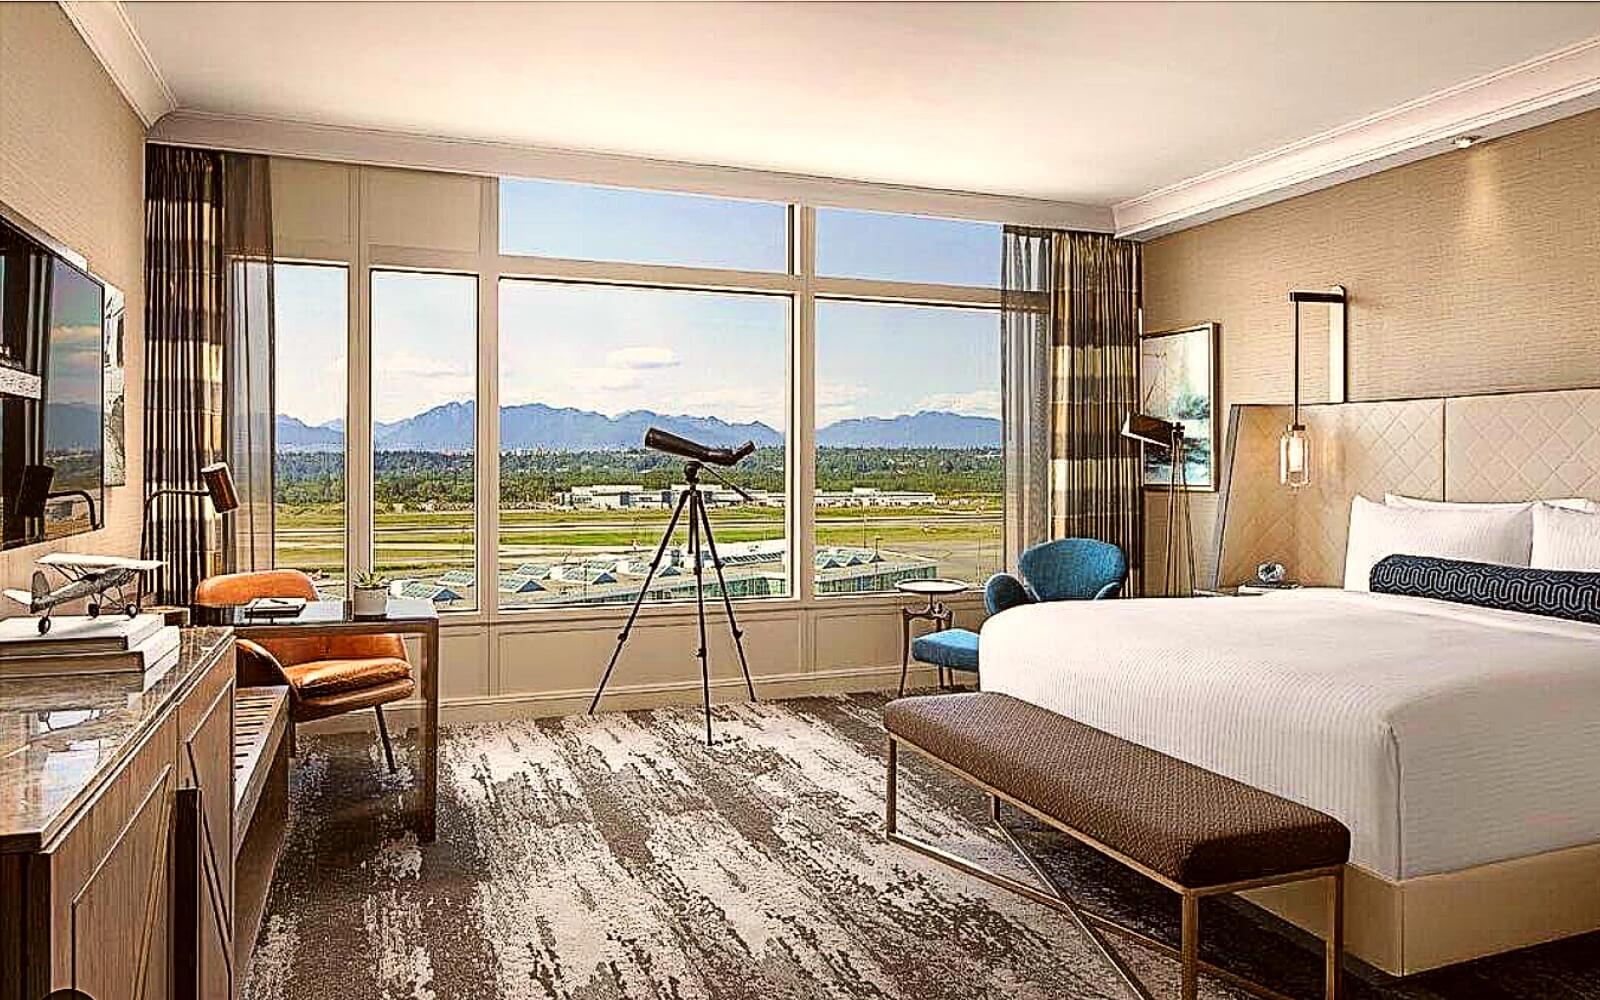 The view from a room at the Fairmont Vancouver Airport